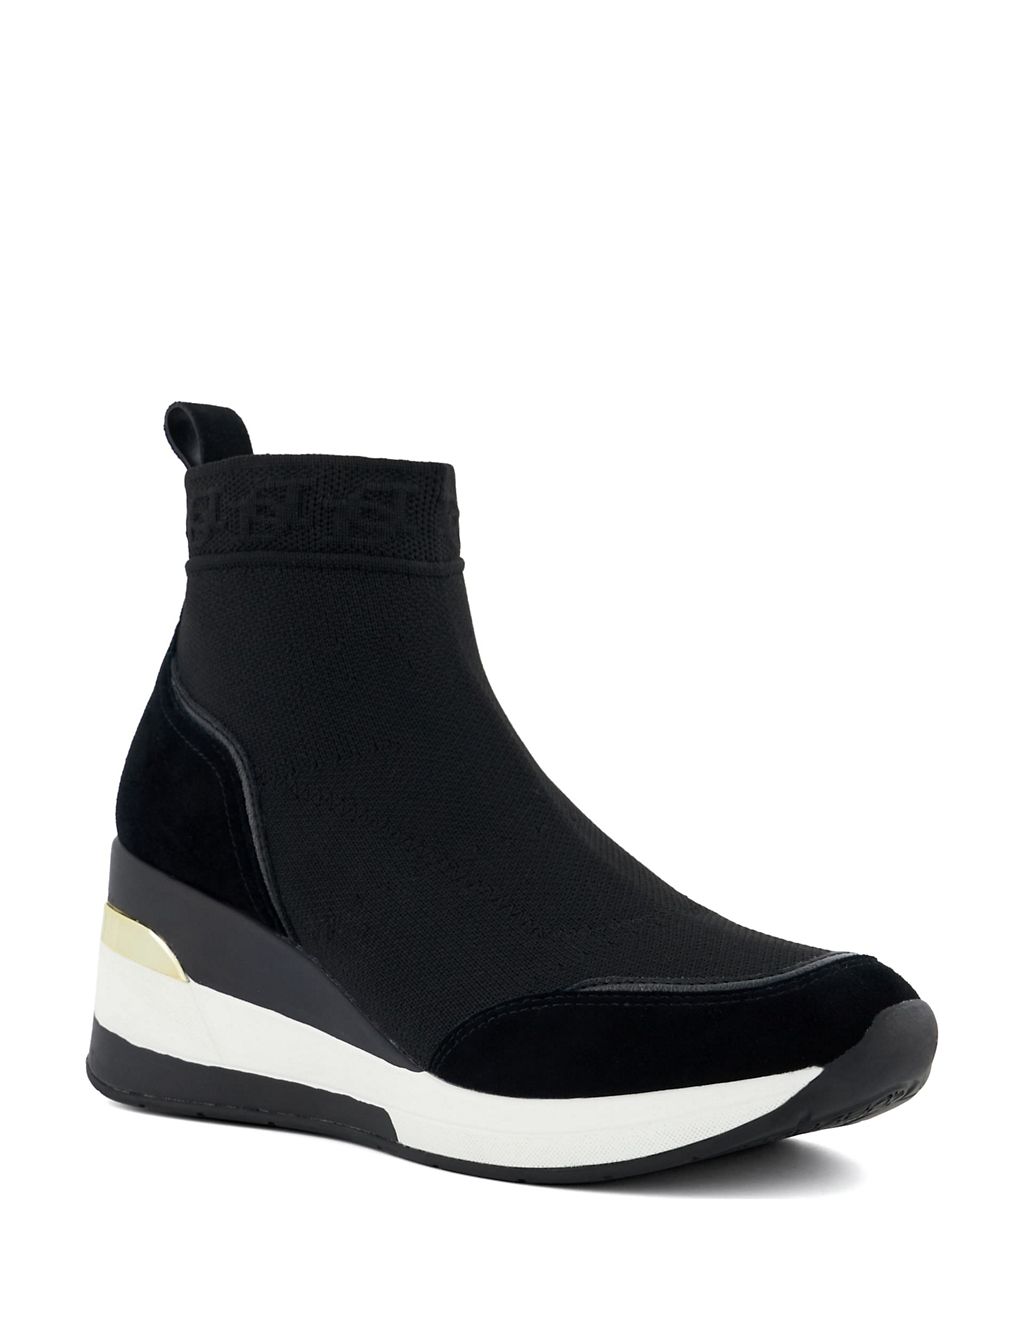 Pull On Wedge Trainers | Dune London | M&S